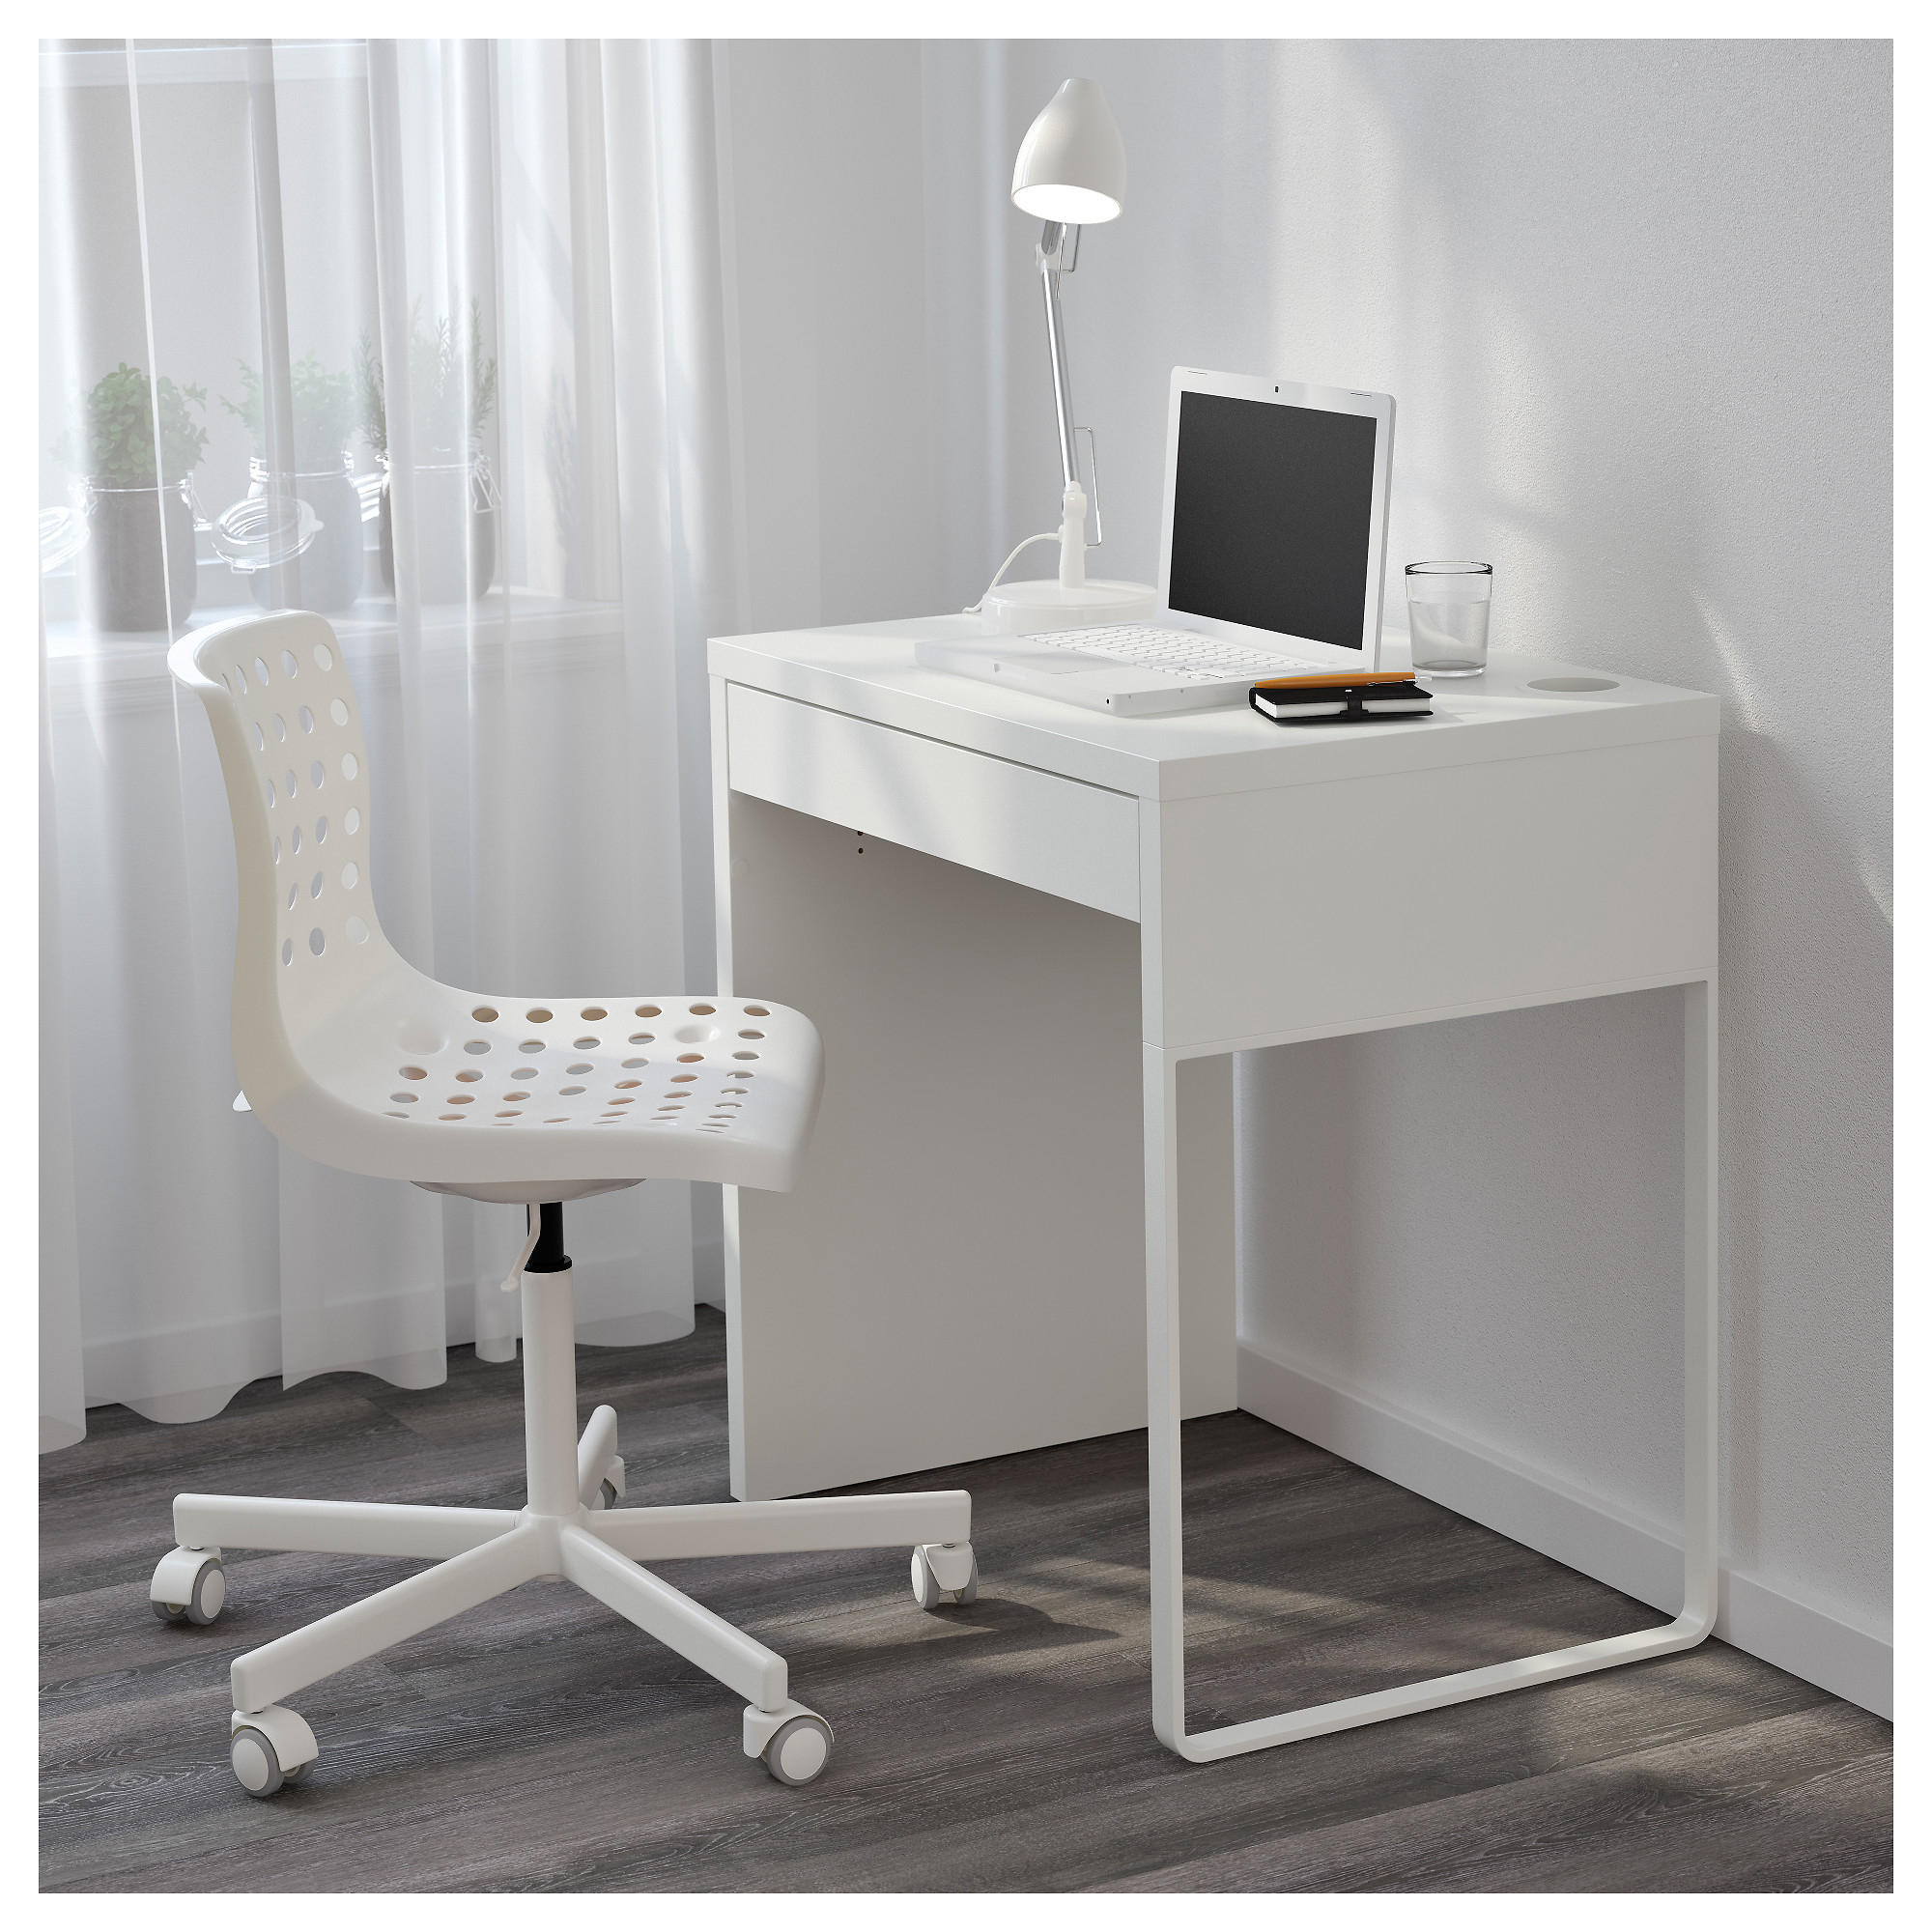 50 Best Small Desks For Spaces, White Writing Desk For Small Spaces